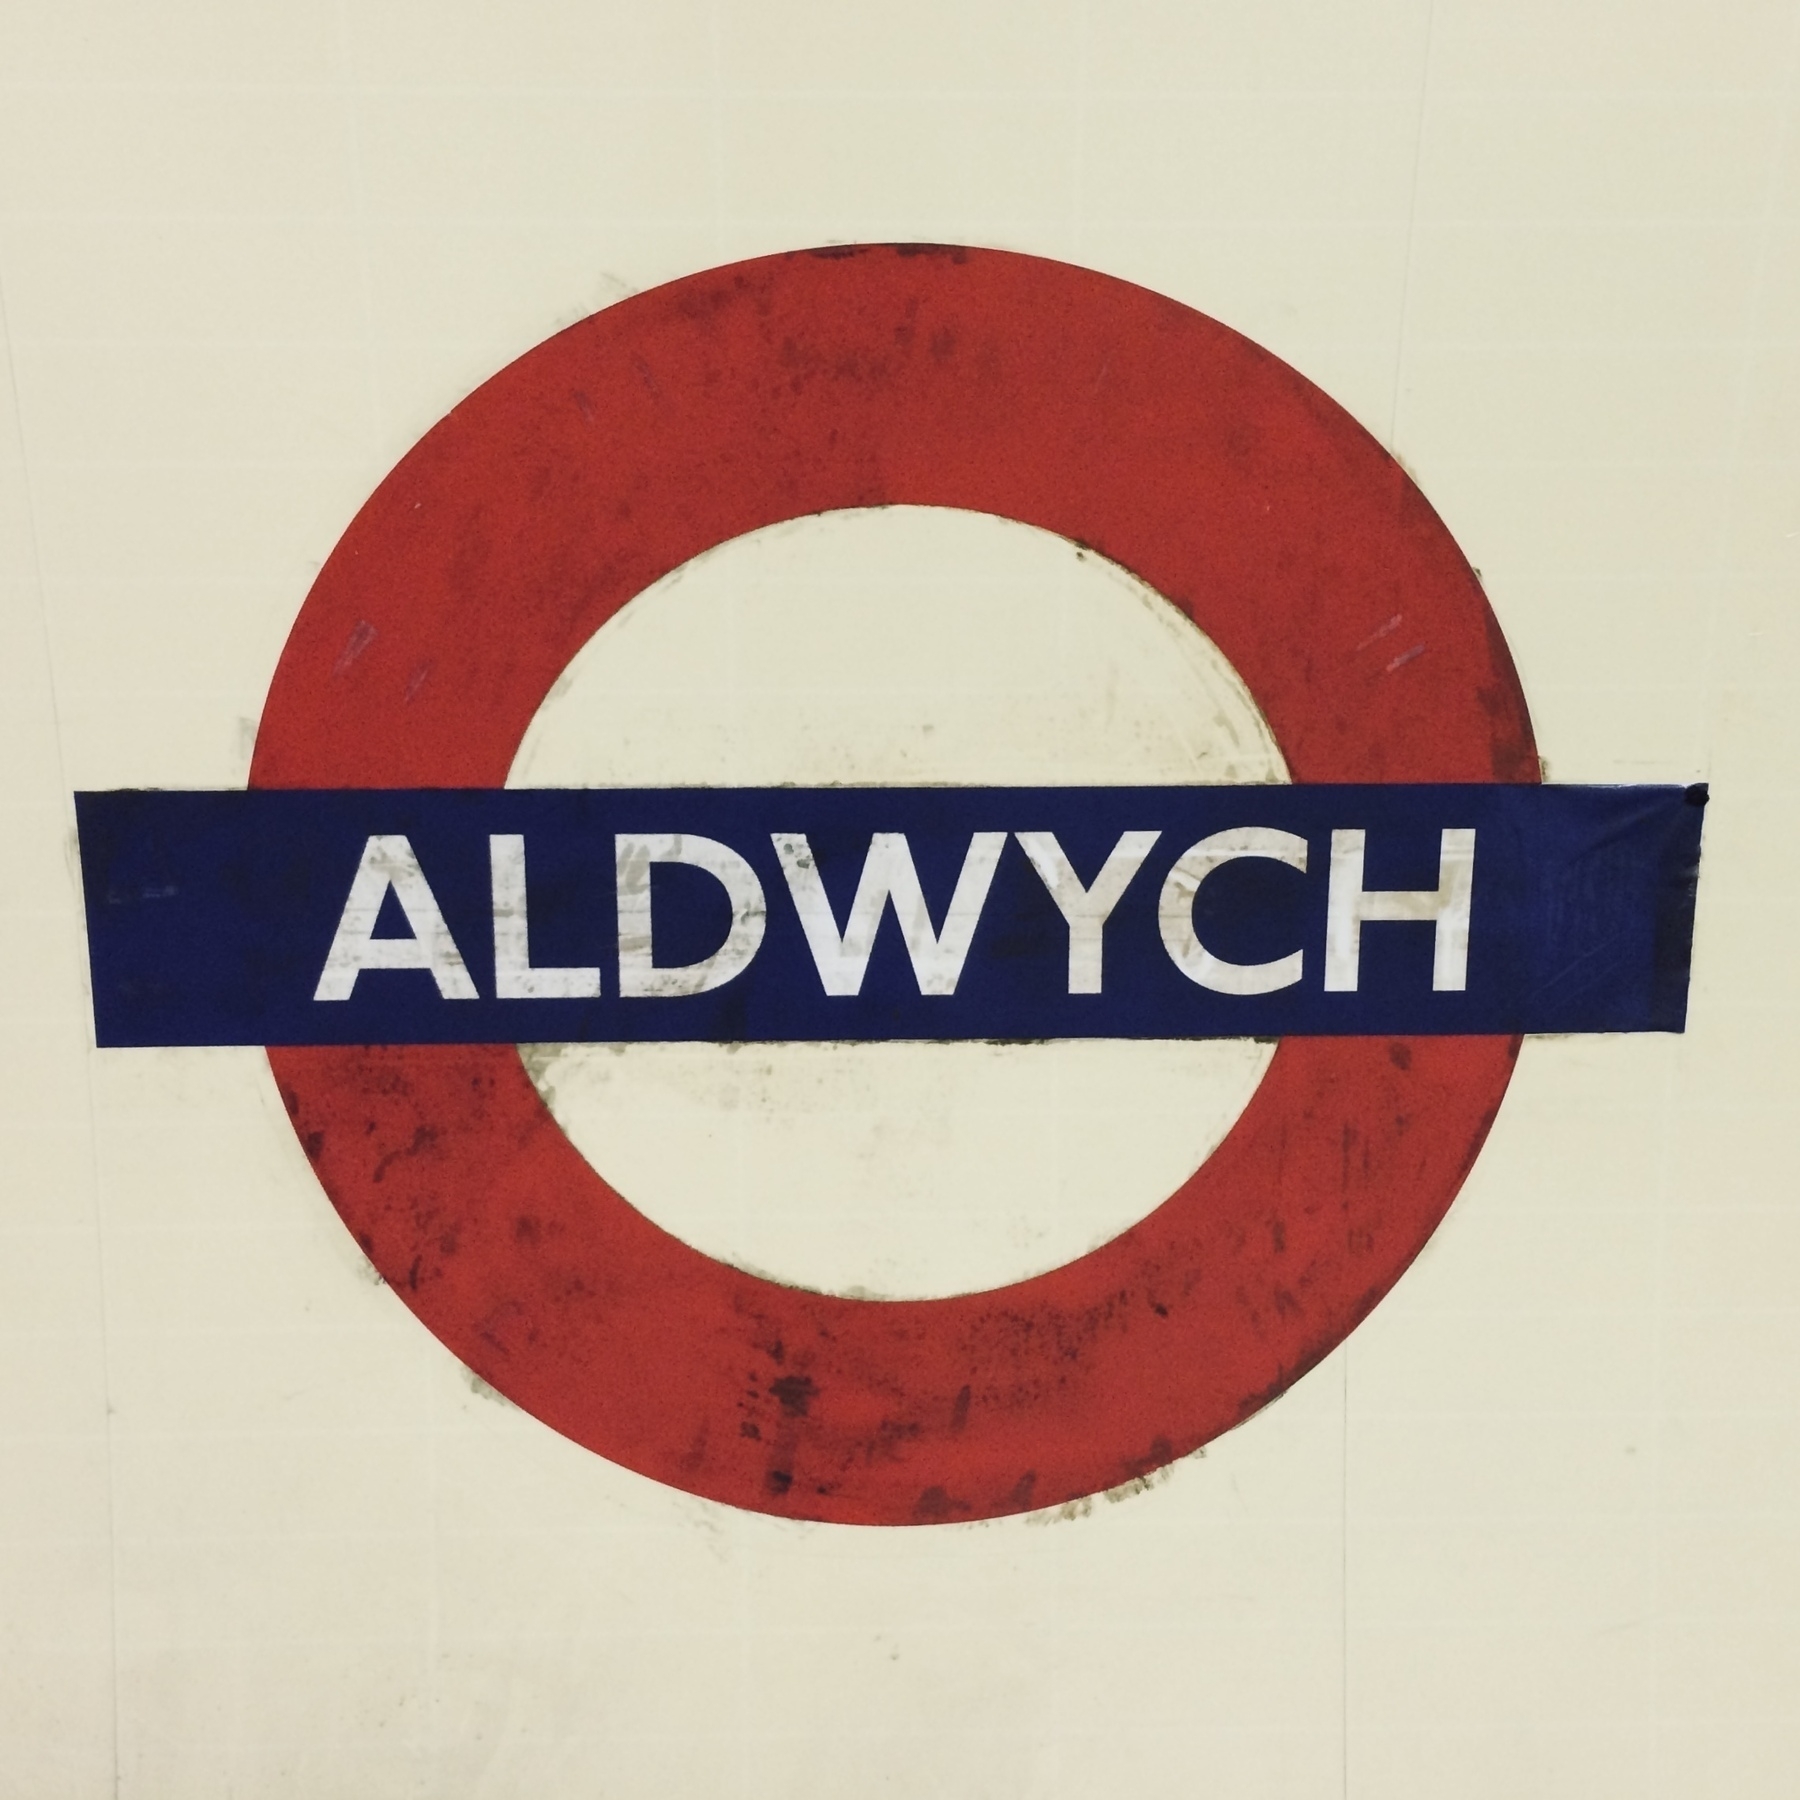 A tube roundel at the closed station Aldwych.